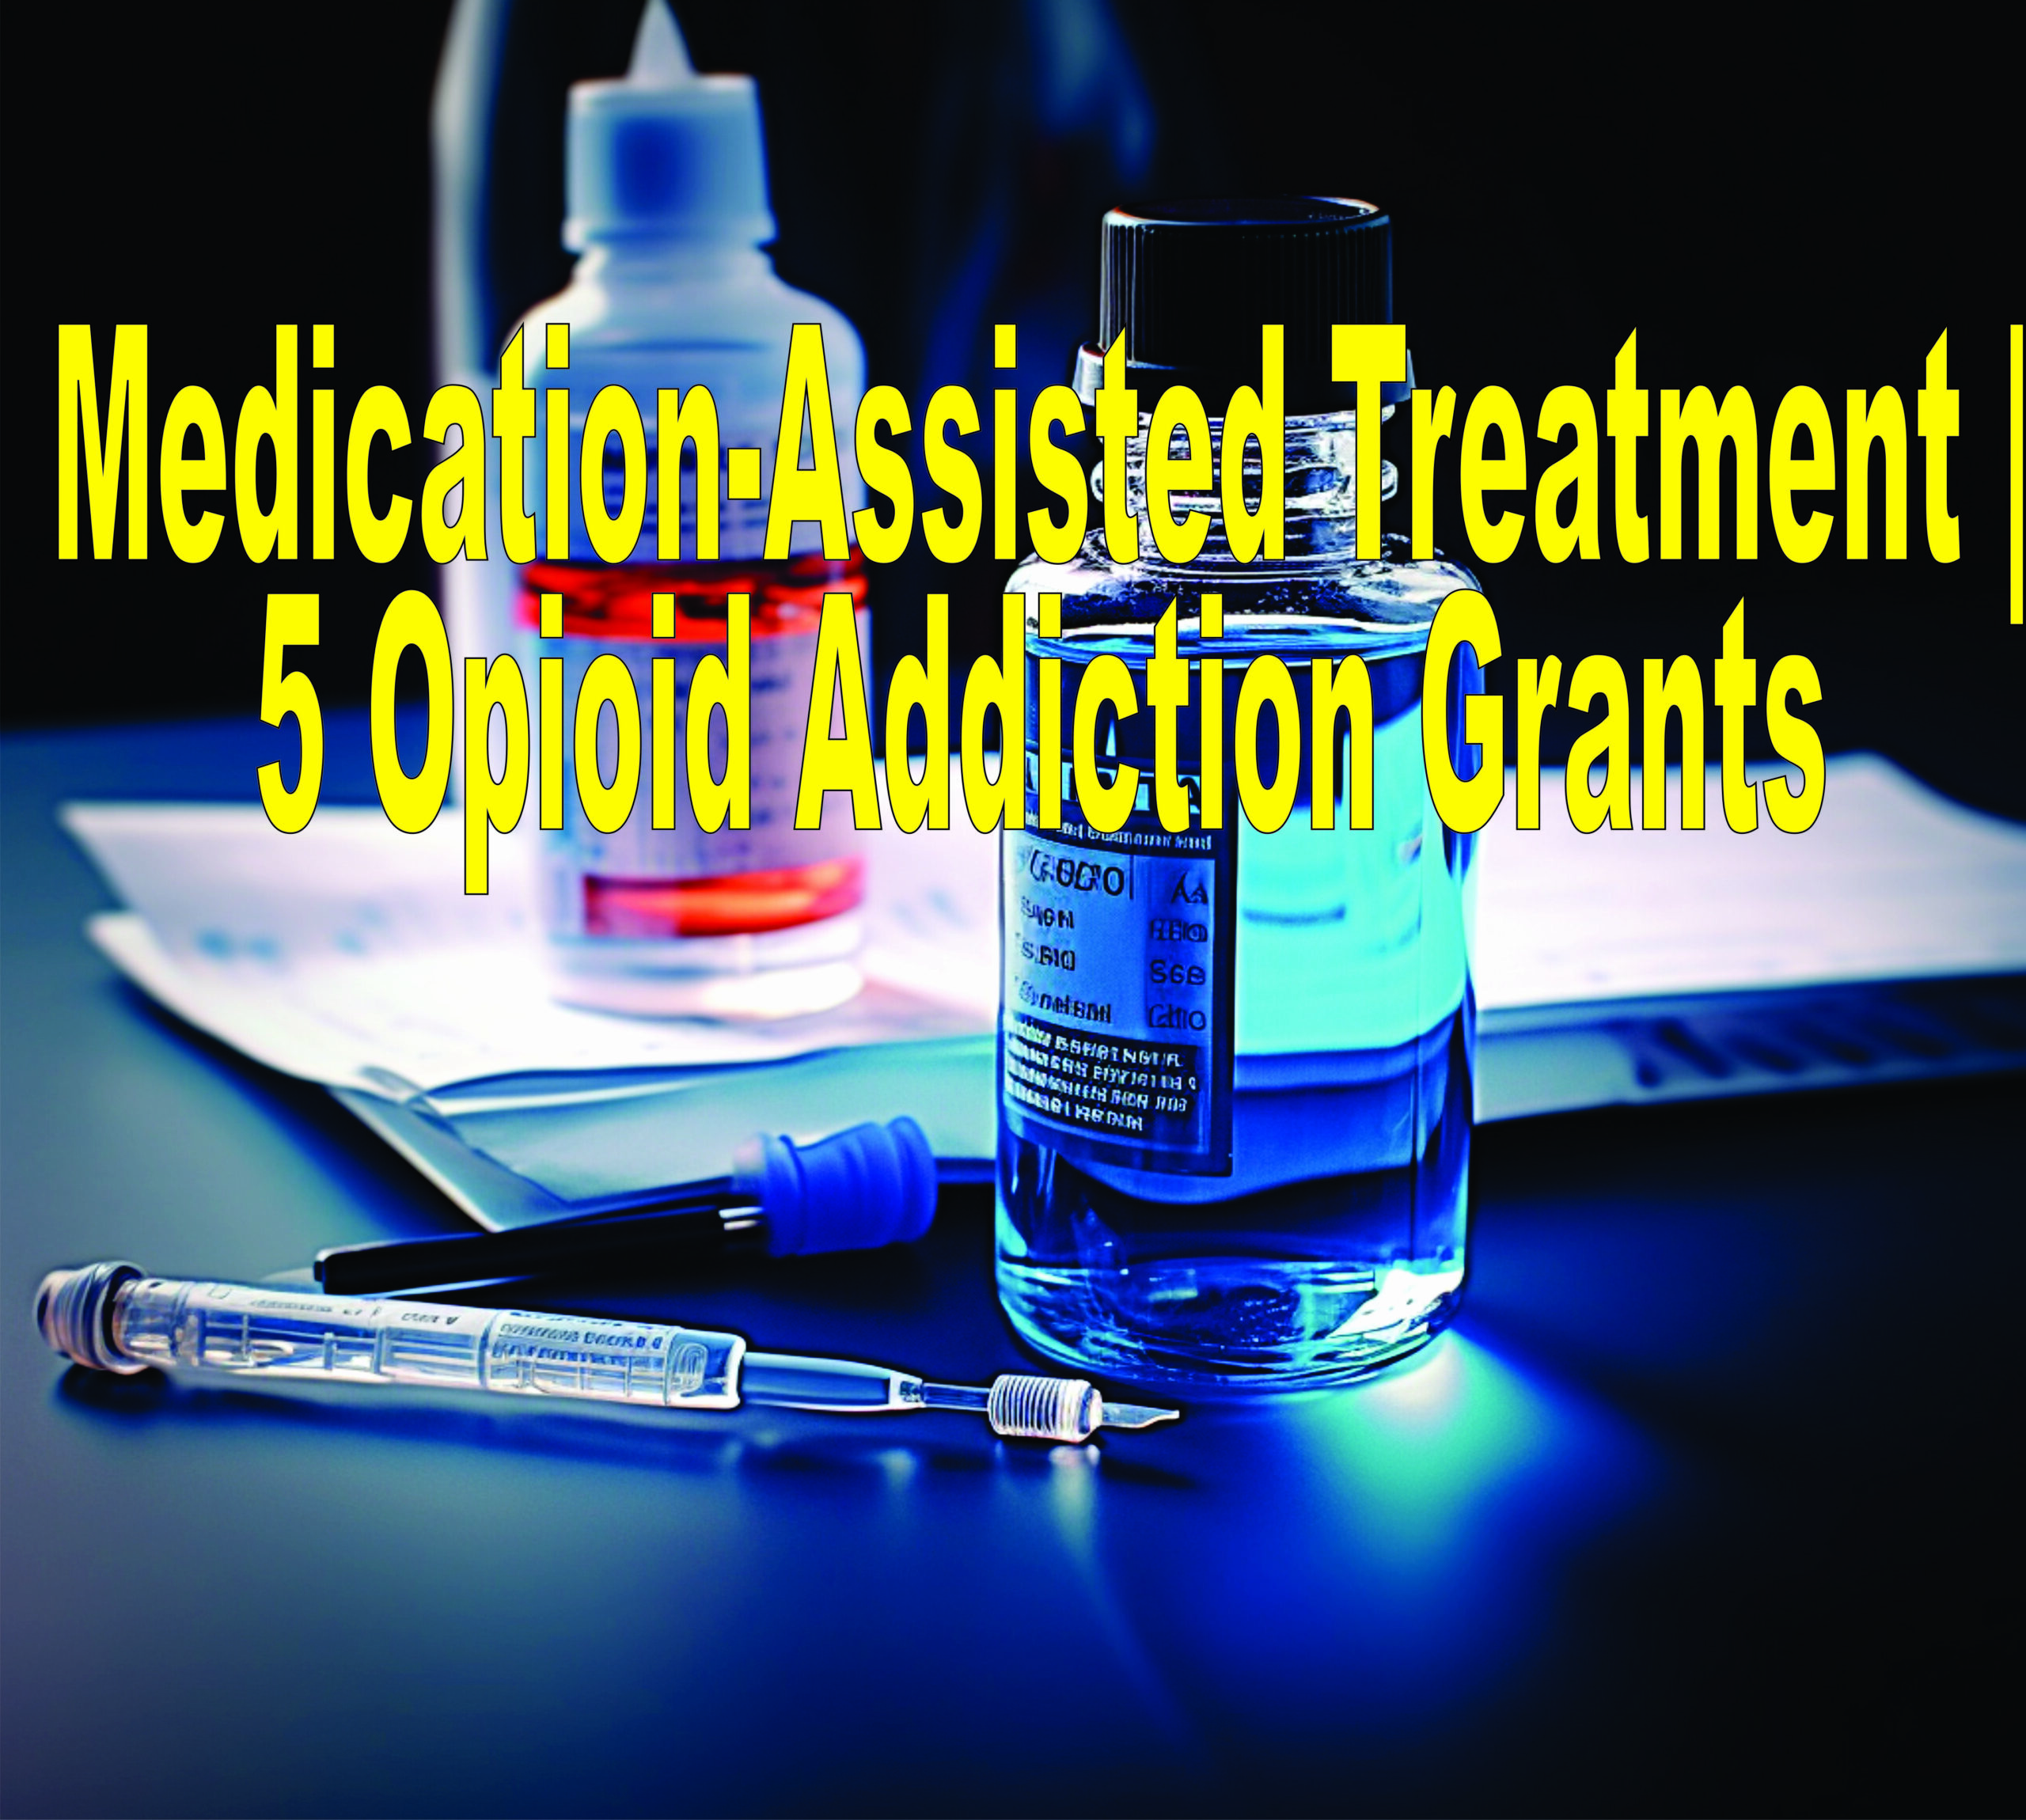 Medication Assisted Treatment 5 Opioid Addiction Grants